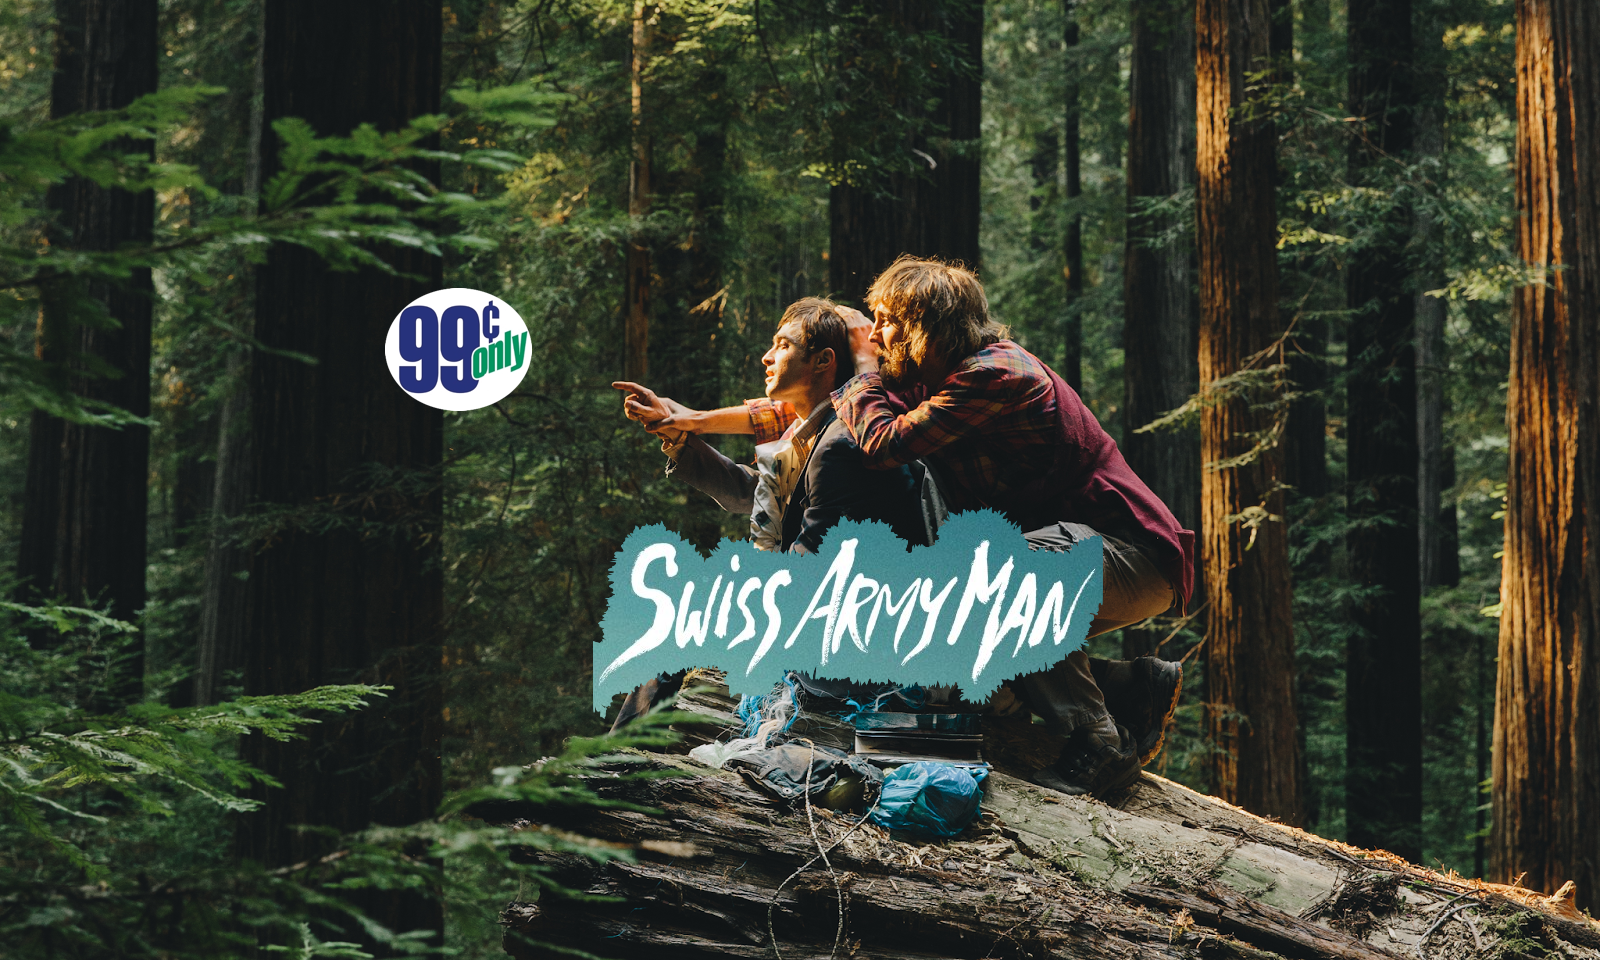 Geek insider, geekinsider, geekinsider. Com,, the (other, other) $0. 99 movie of the week: 'swiss army man', entertainment